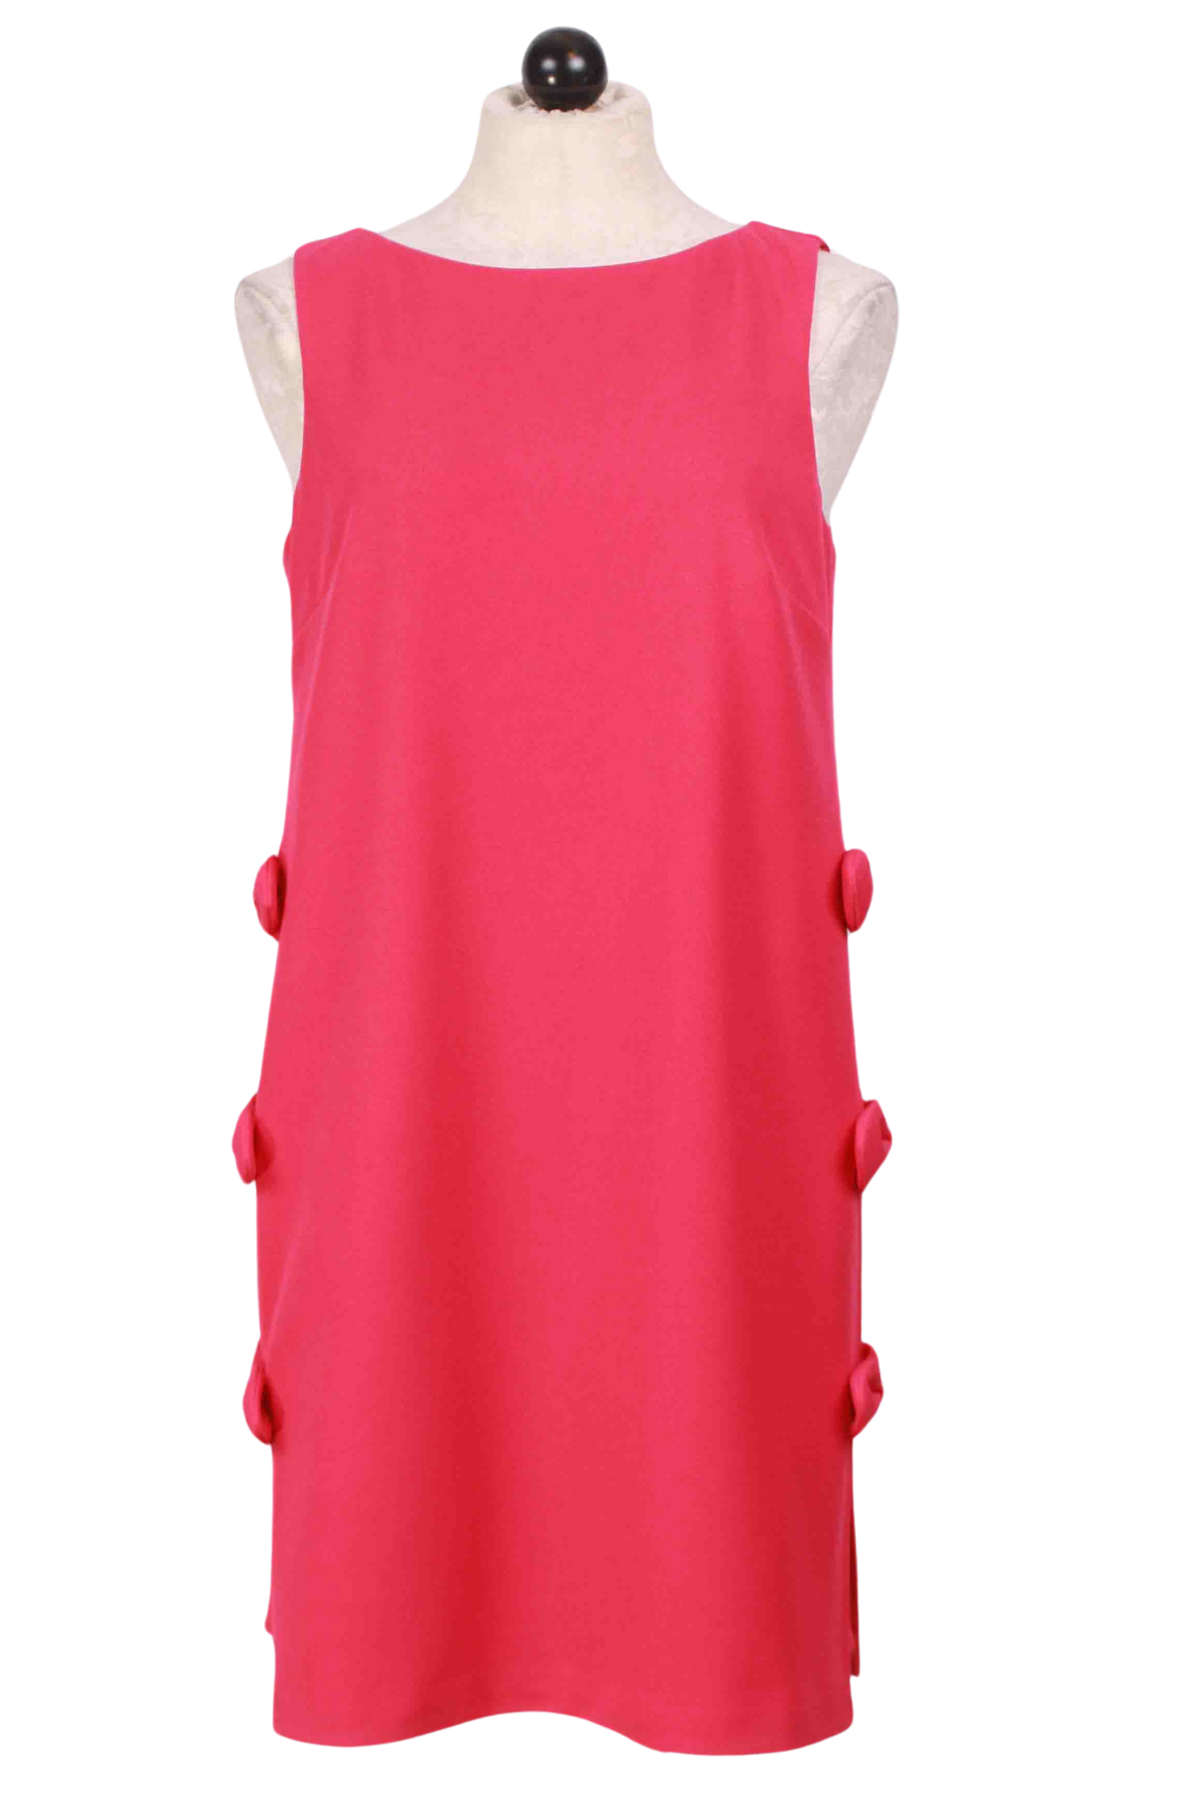 Hibiscus Sleeveless Arlette Dress by Trina Turk with 3 bows on the sides